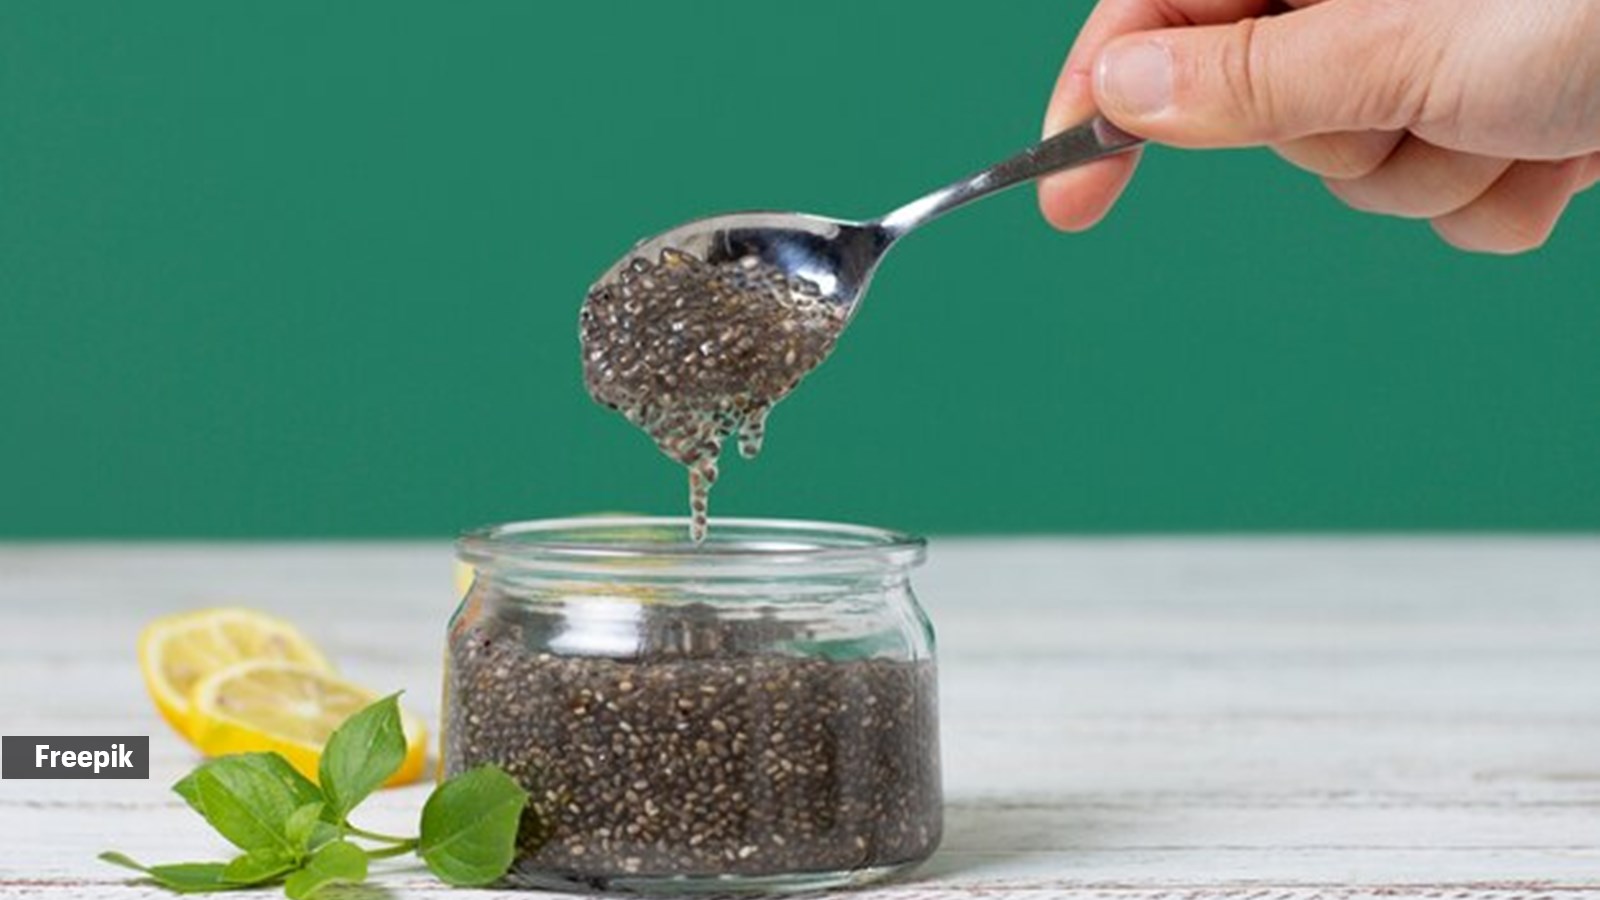 Nutrition alert: Here's what a 28-gram serving of chia seeds contains